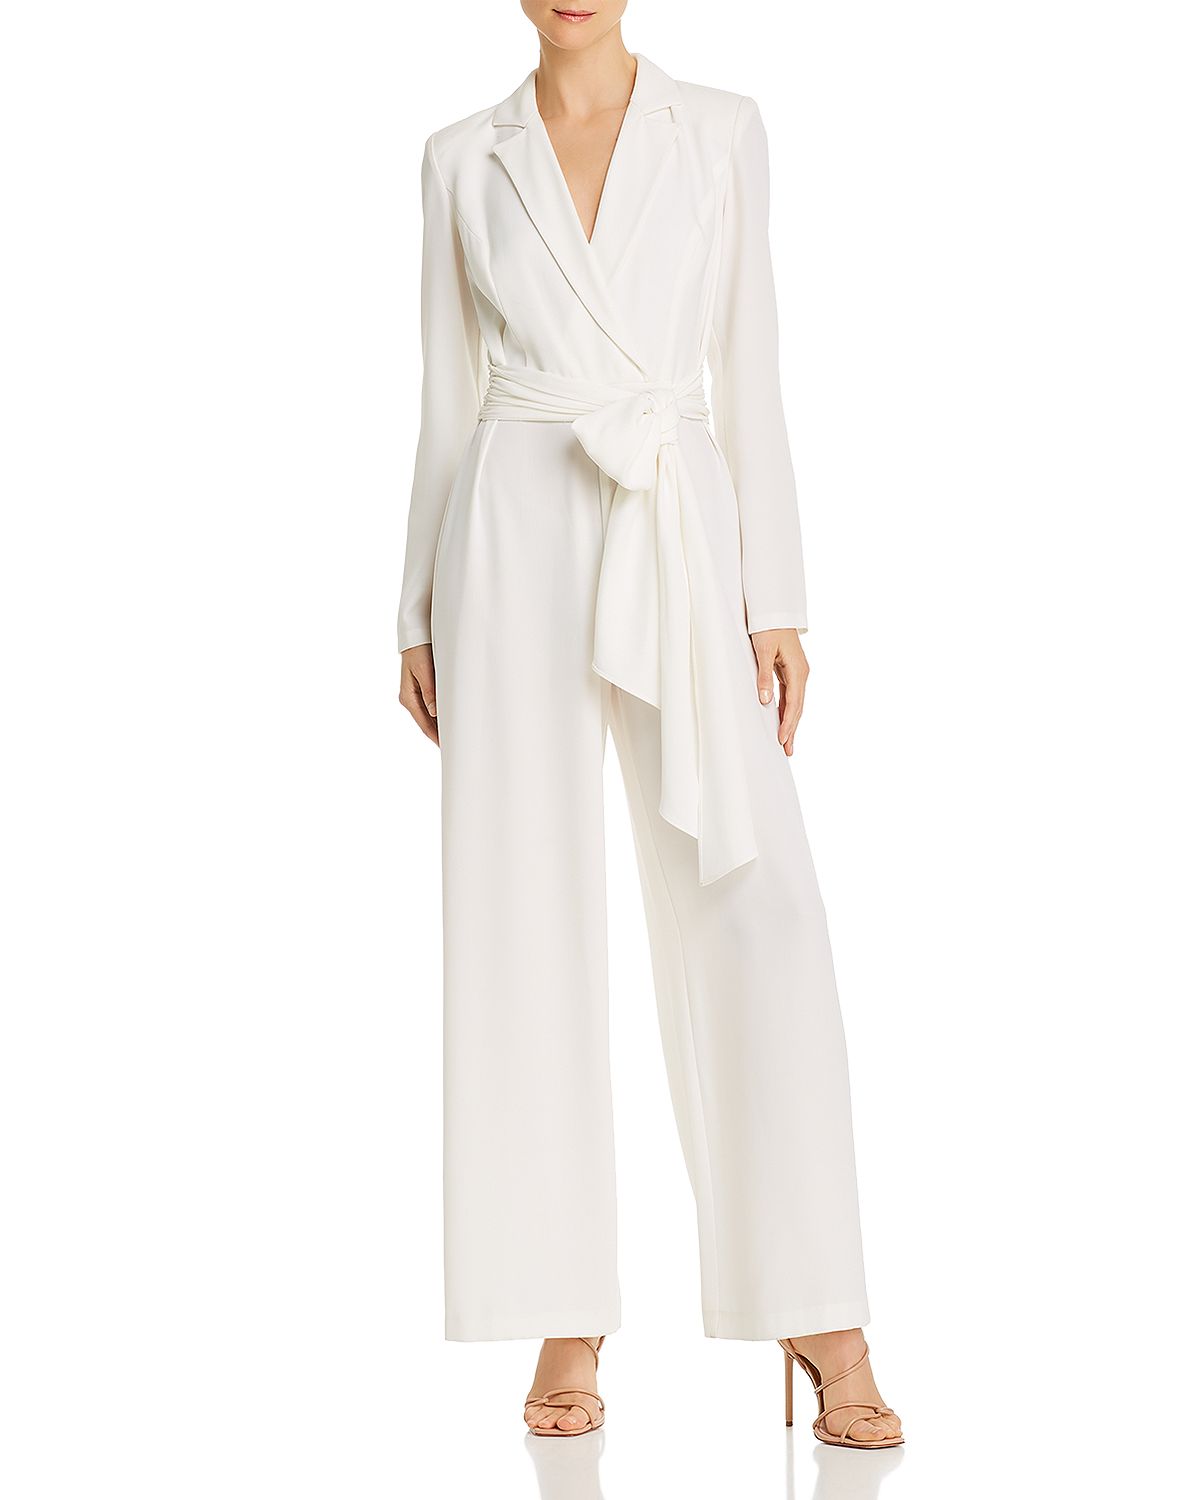 Say it with me - a belted blazer jumpsuit - and feel the power course through your veins.